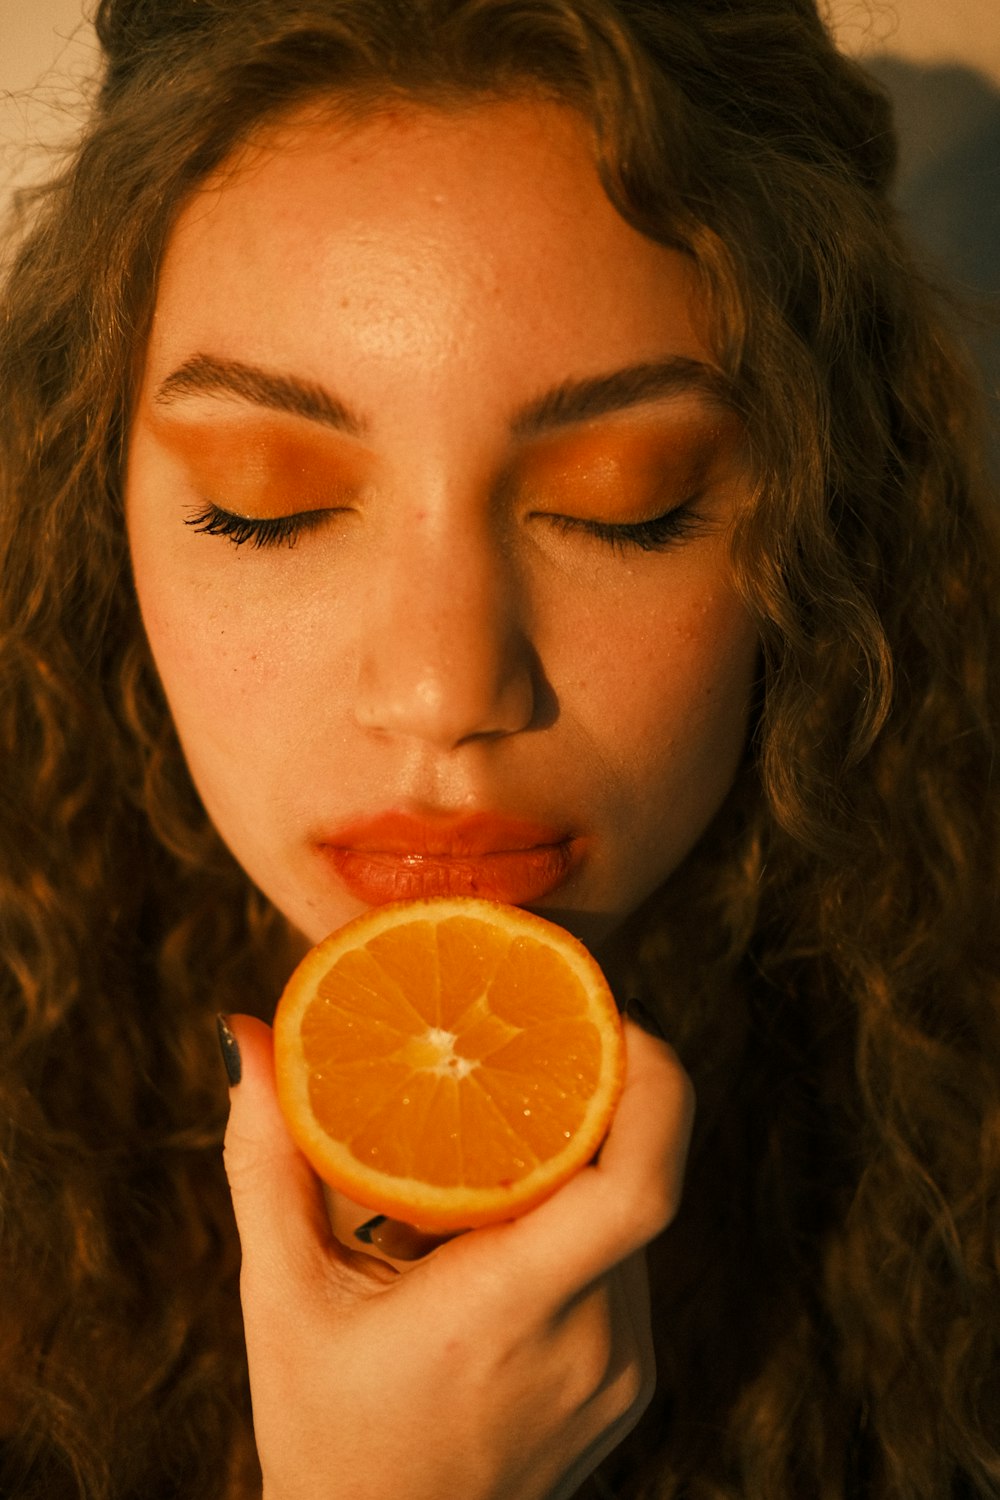 a woman is holding an orange slice to her mouth